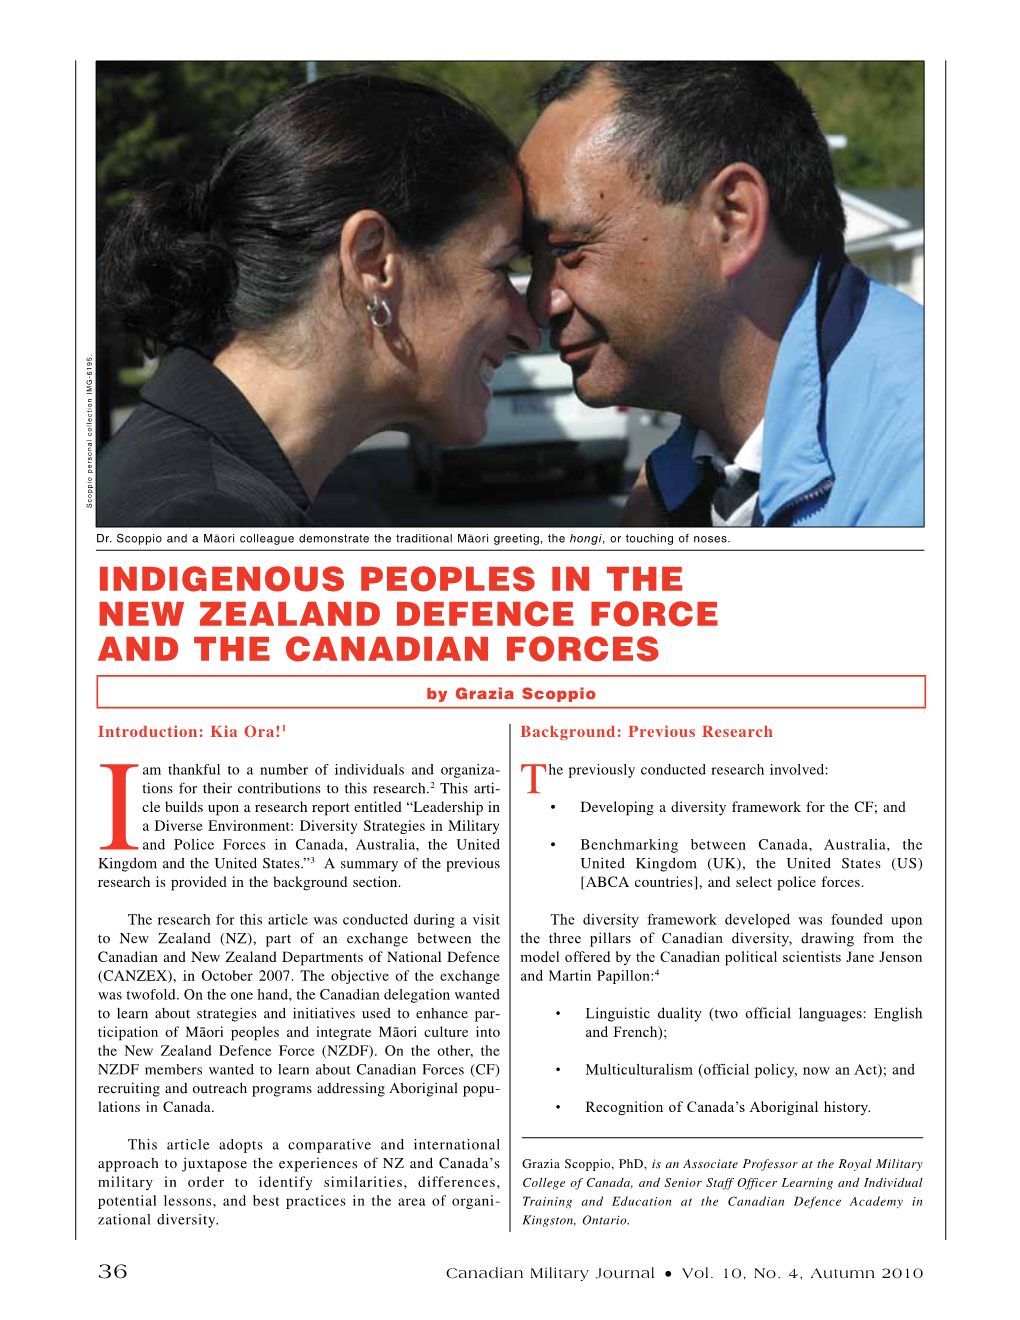 Indigenous Peoples in the New Zealand Defence Force and the Canadian Forces